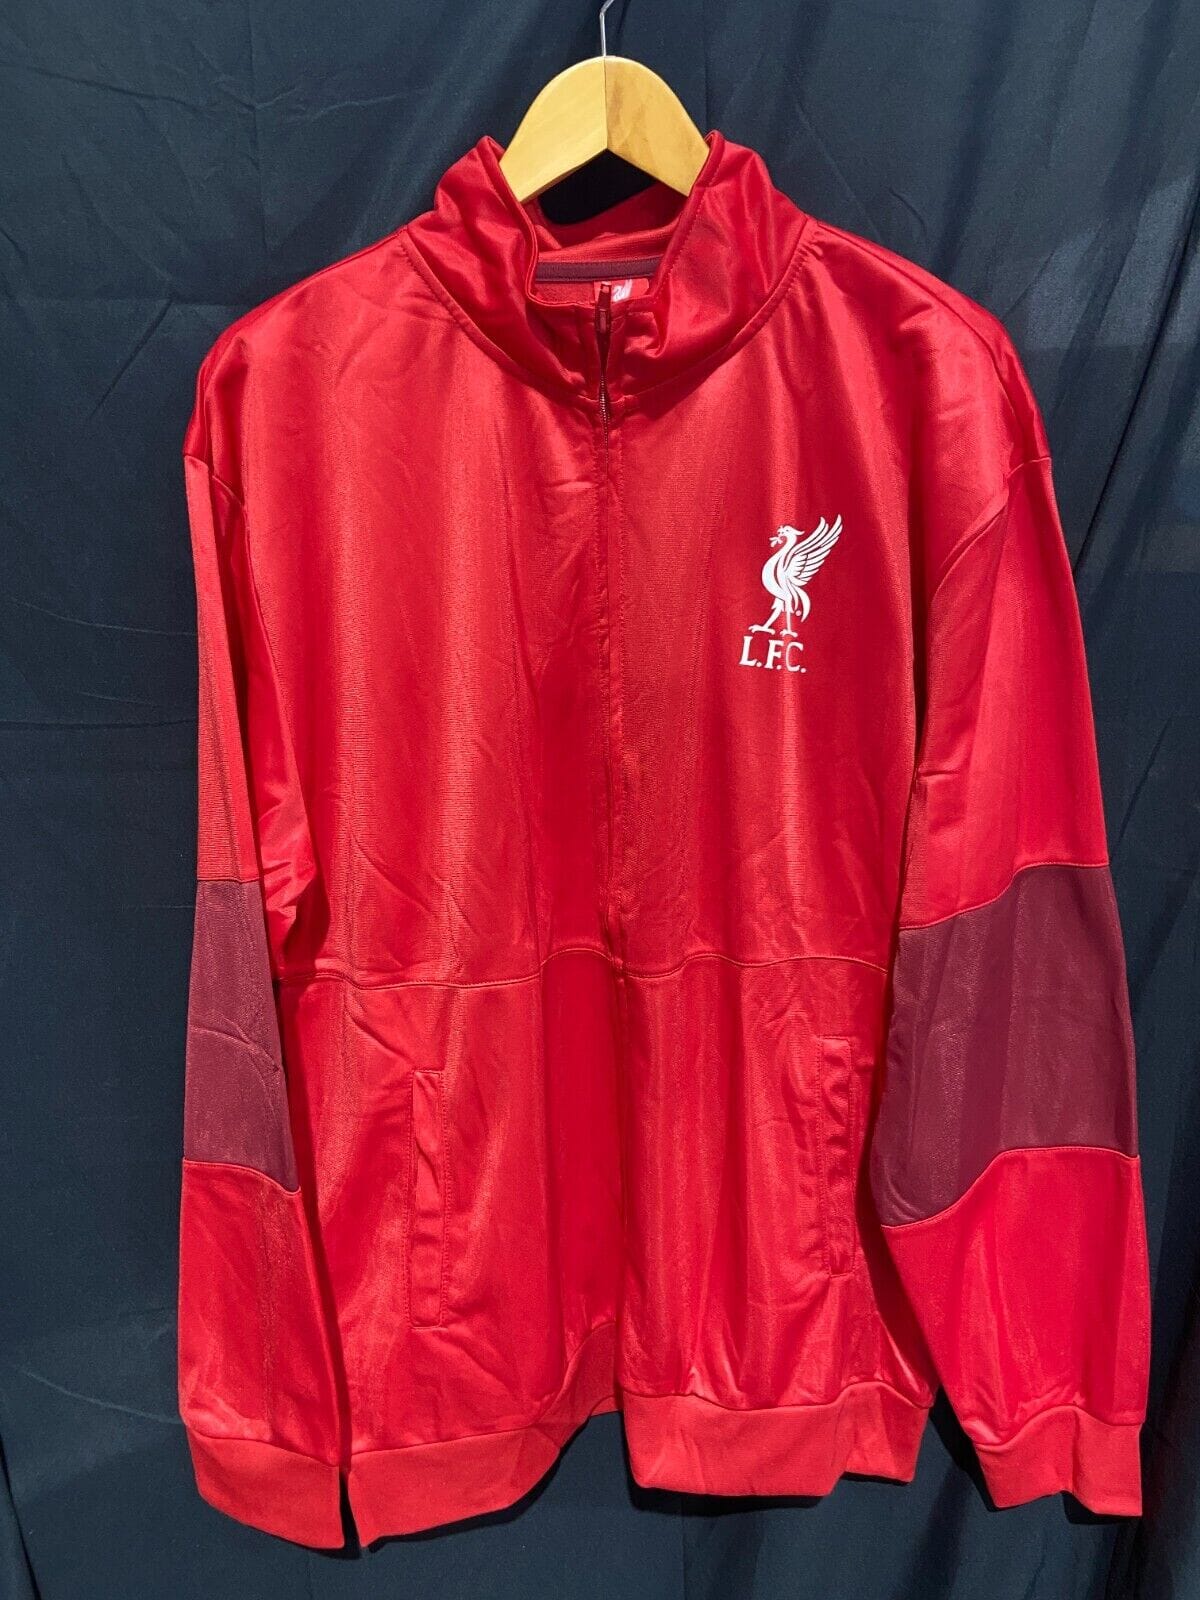 Products Icon Sports Adult Liverpool FC Touchline Full-zip Track Jacket |X-Large Goal Kick Soccer 